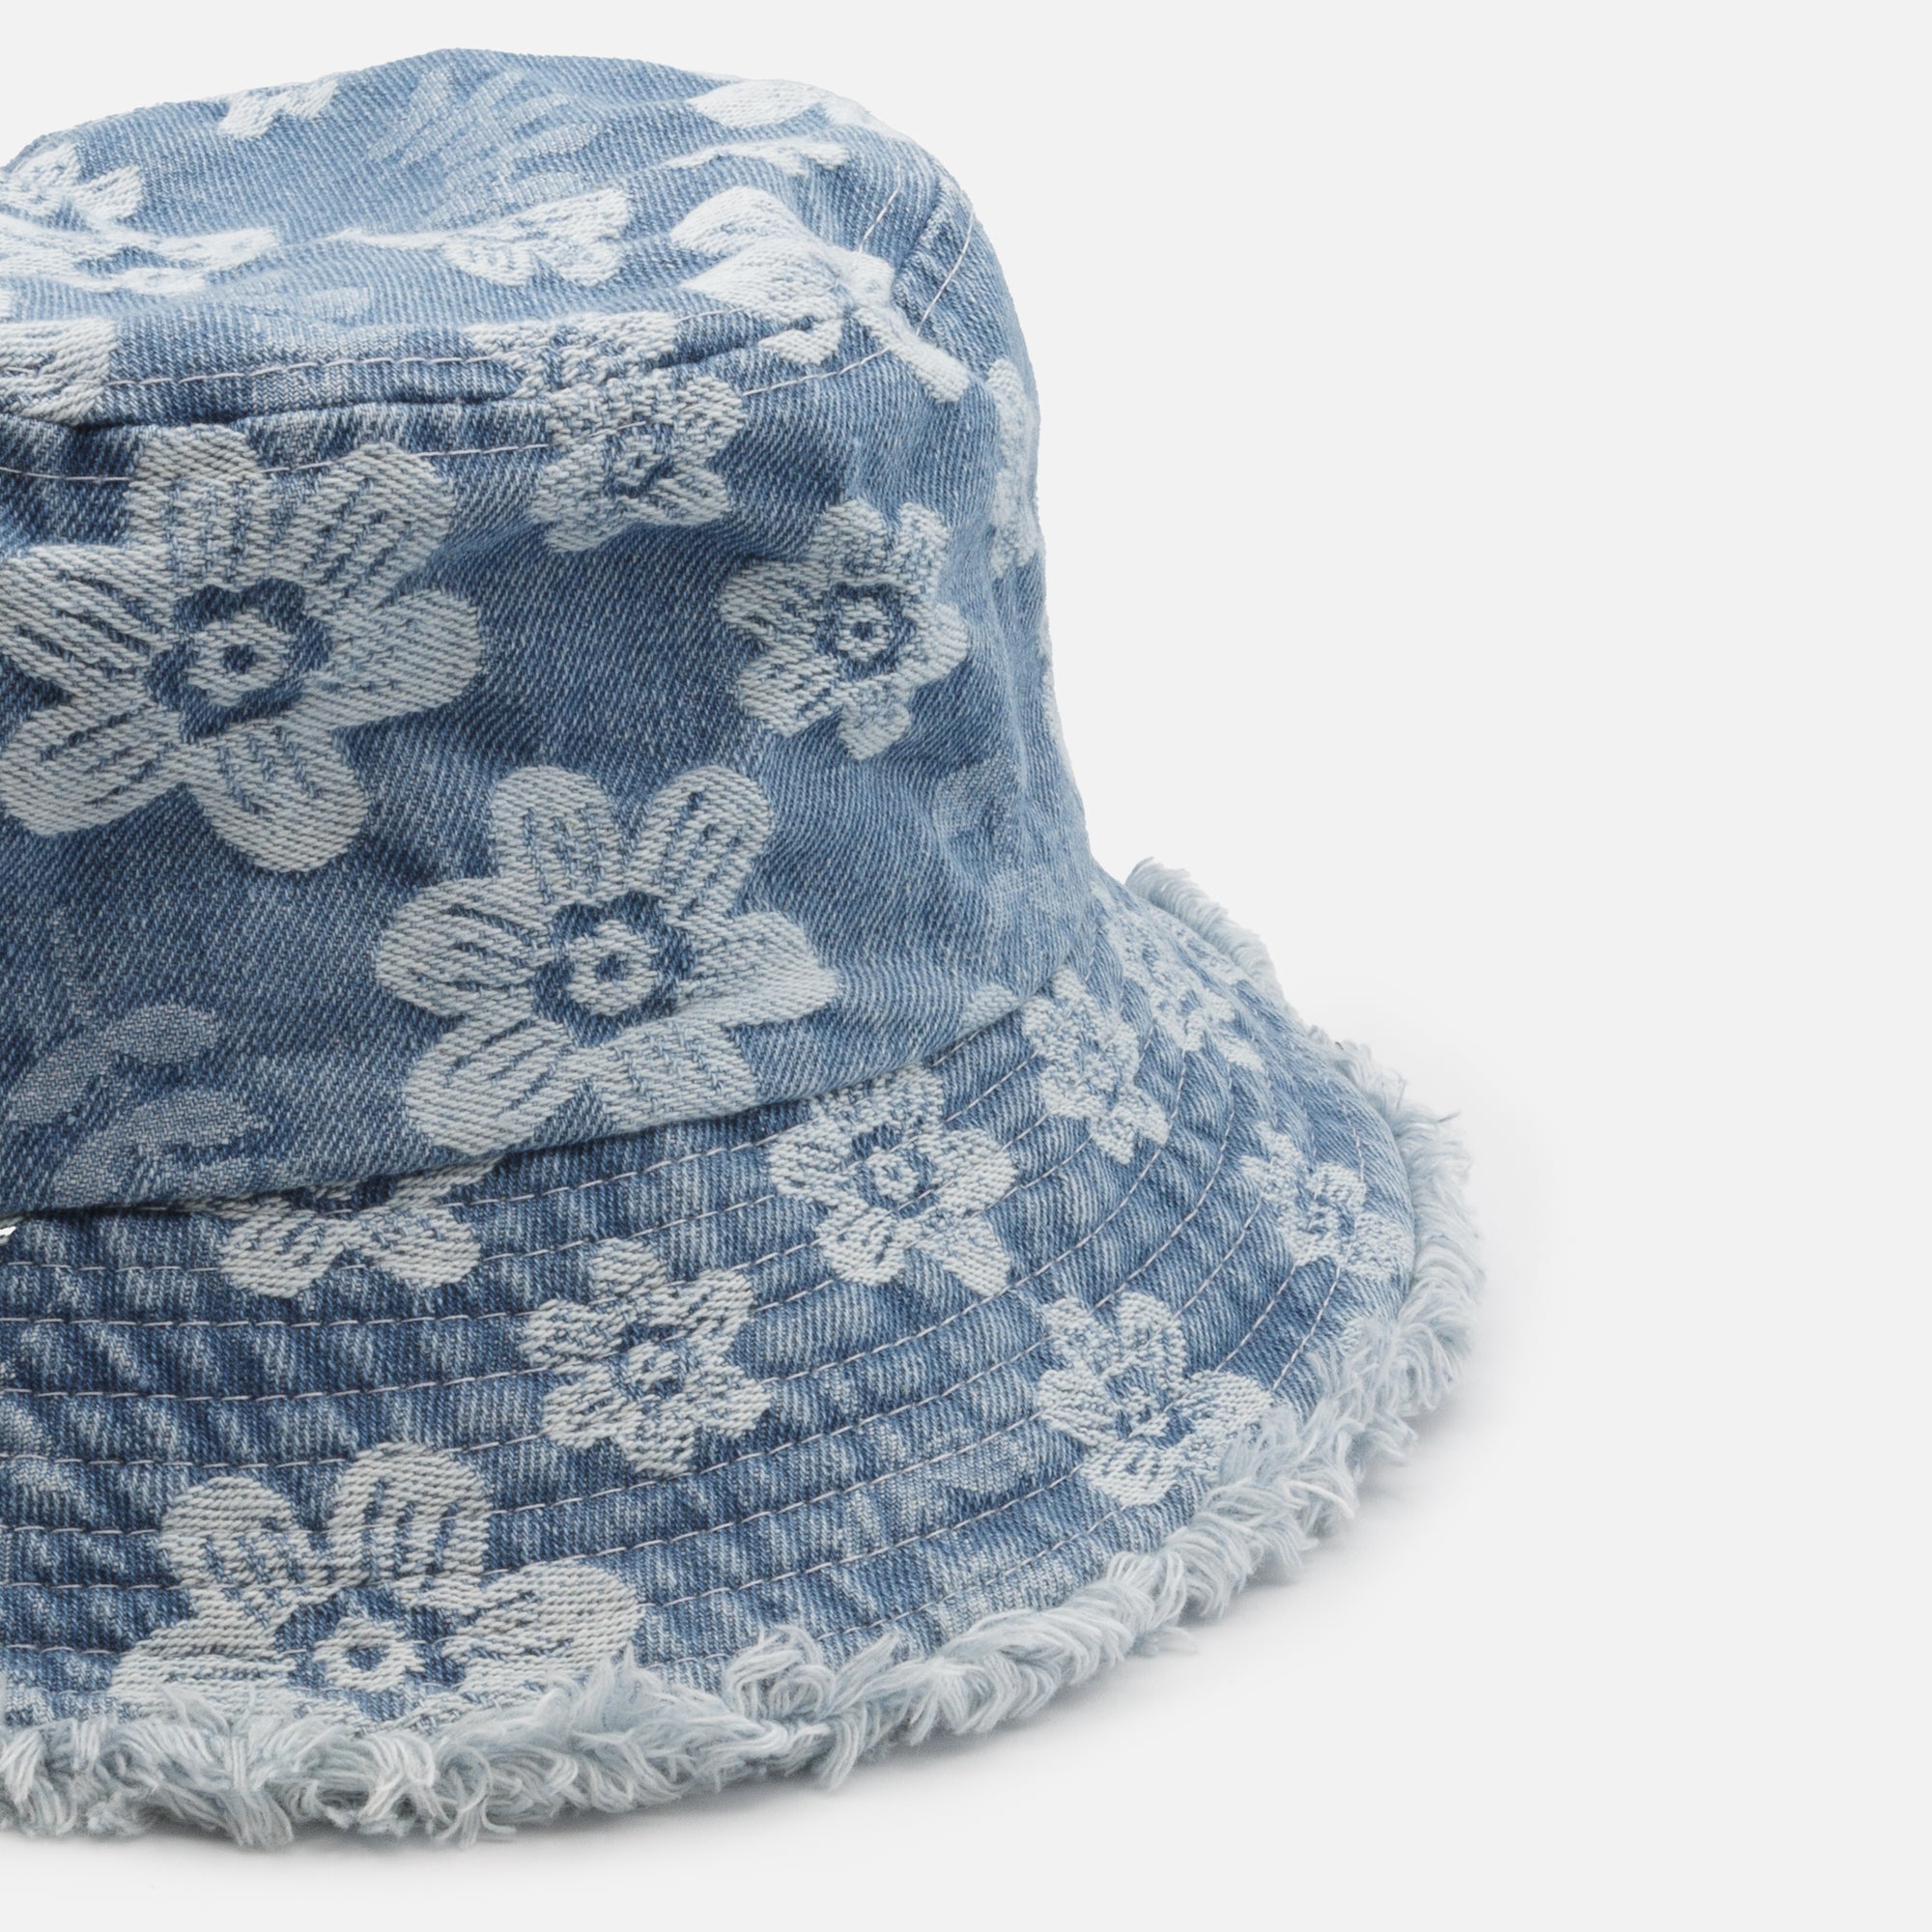 Denim cloche hat with flower embroidery and fringe trim